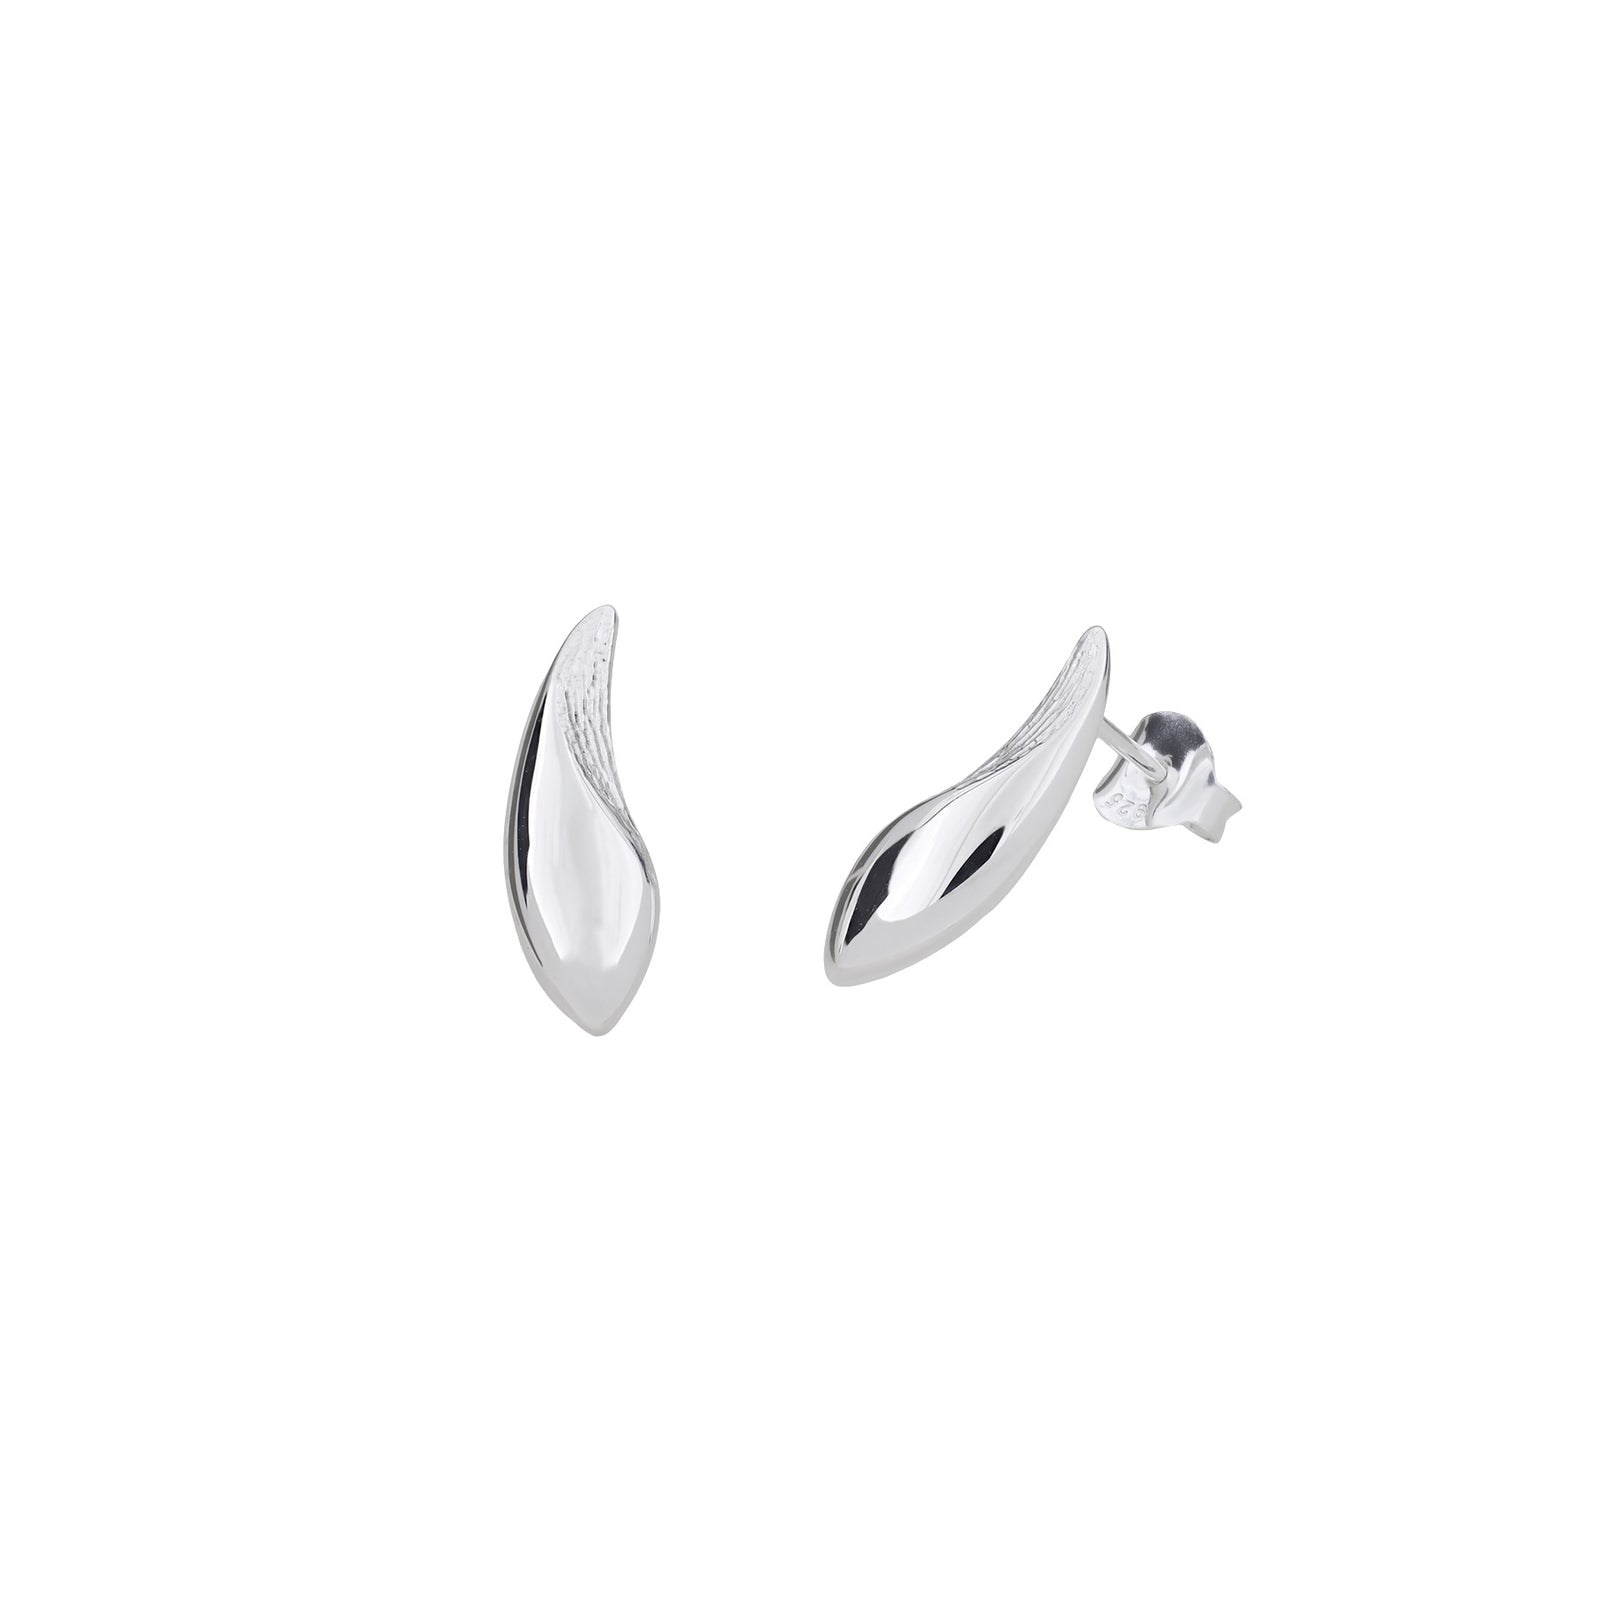 Polished & Textured Silver Droplet Stud Earrings